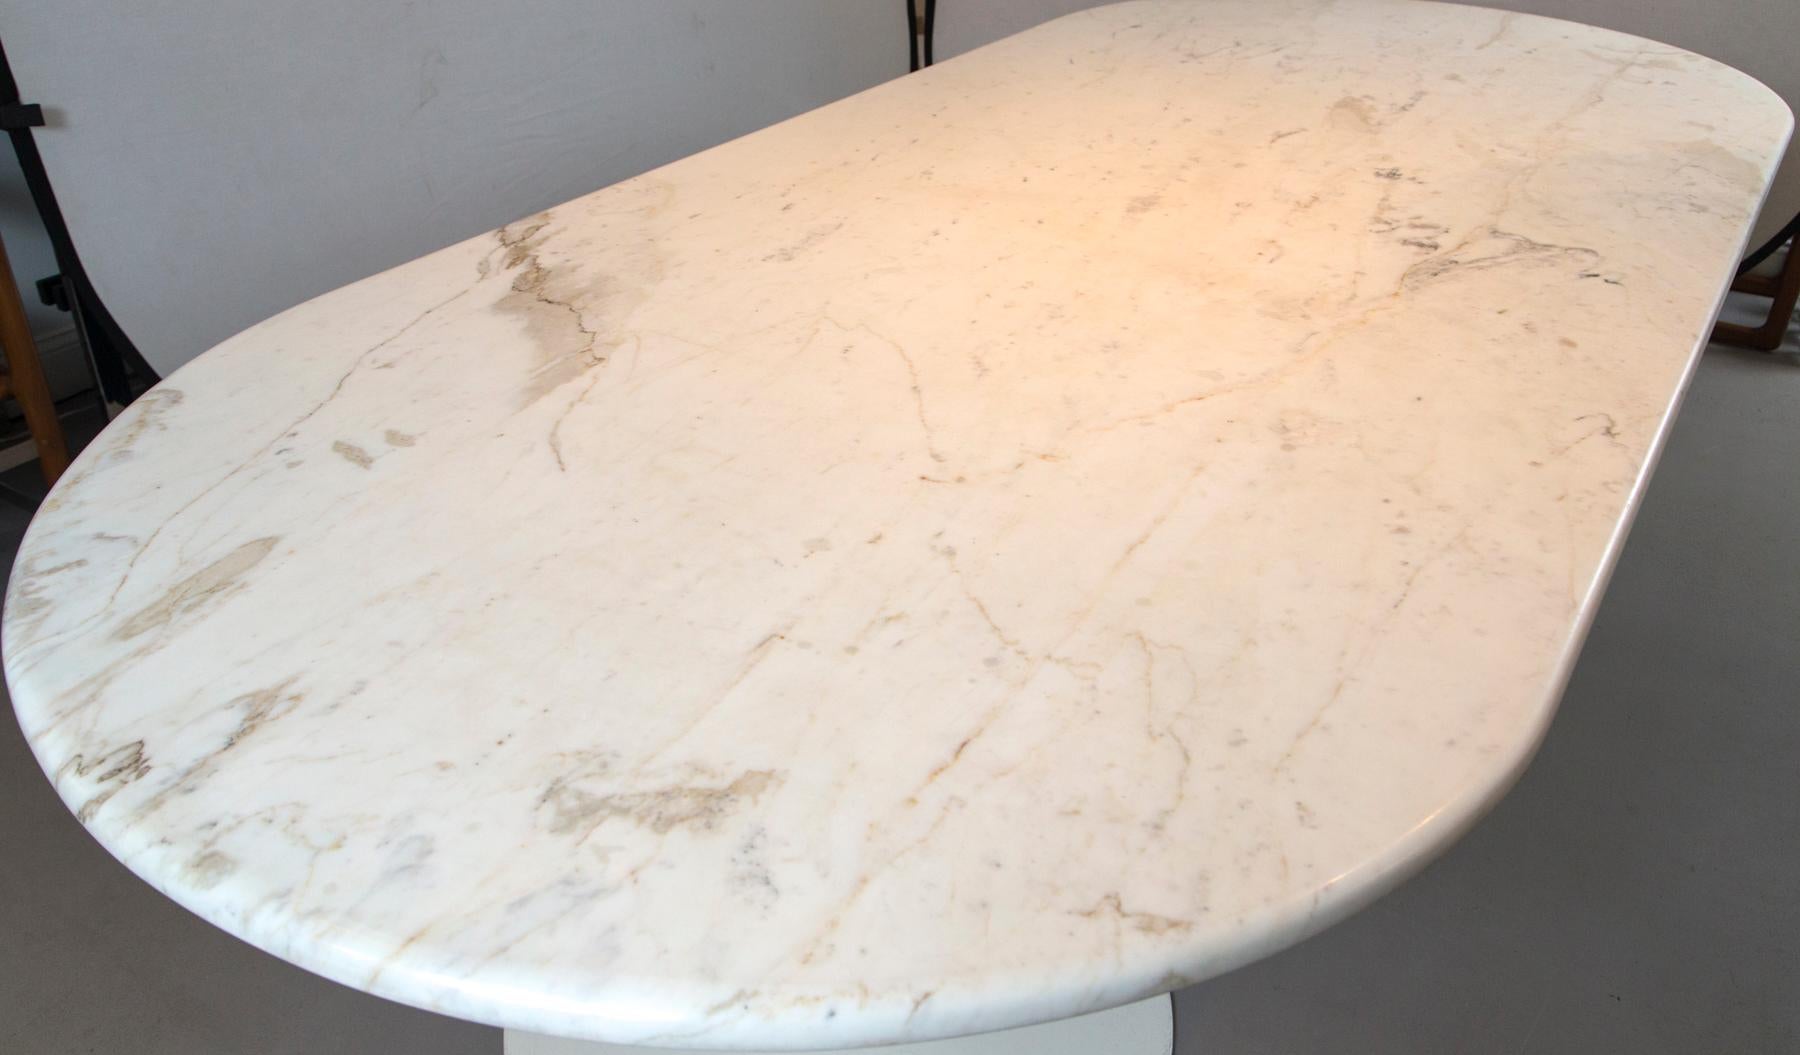 Finnish Midcentury Tulip Dining Table Bases Attributed to Saarinen with Marble Top